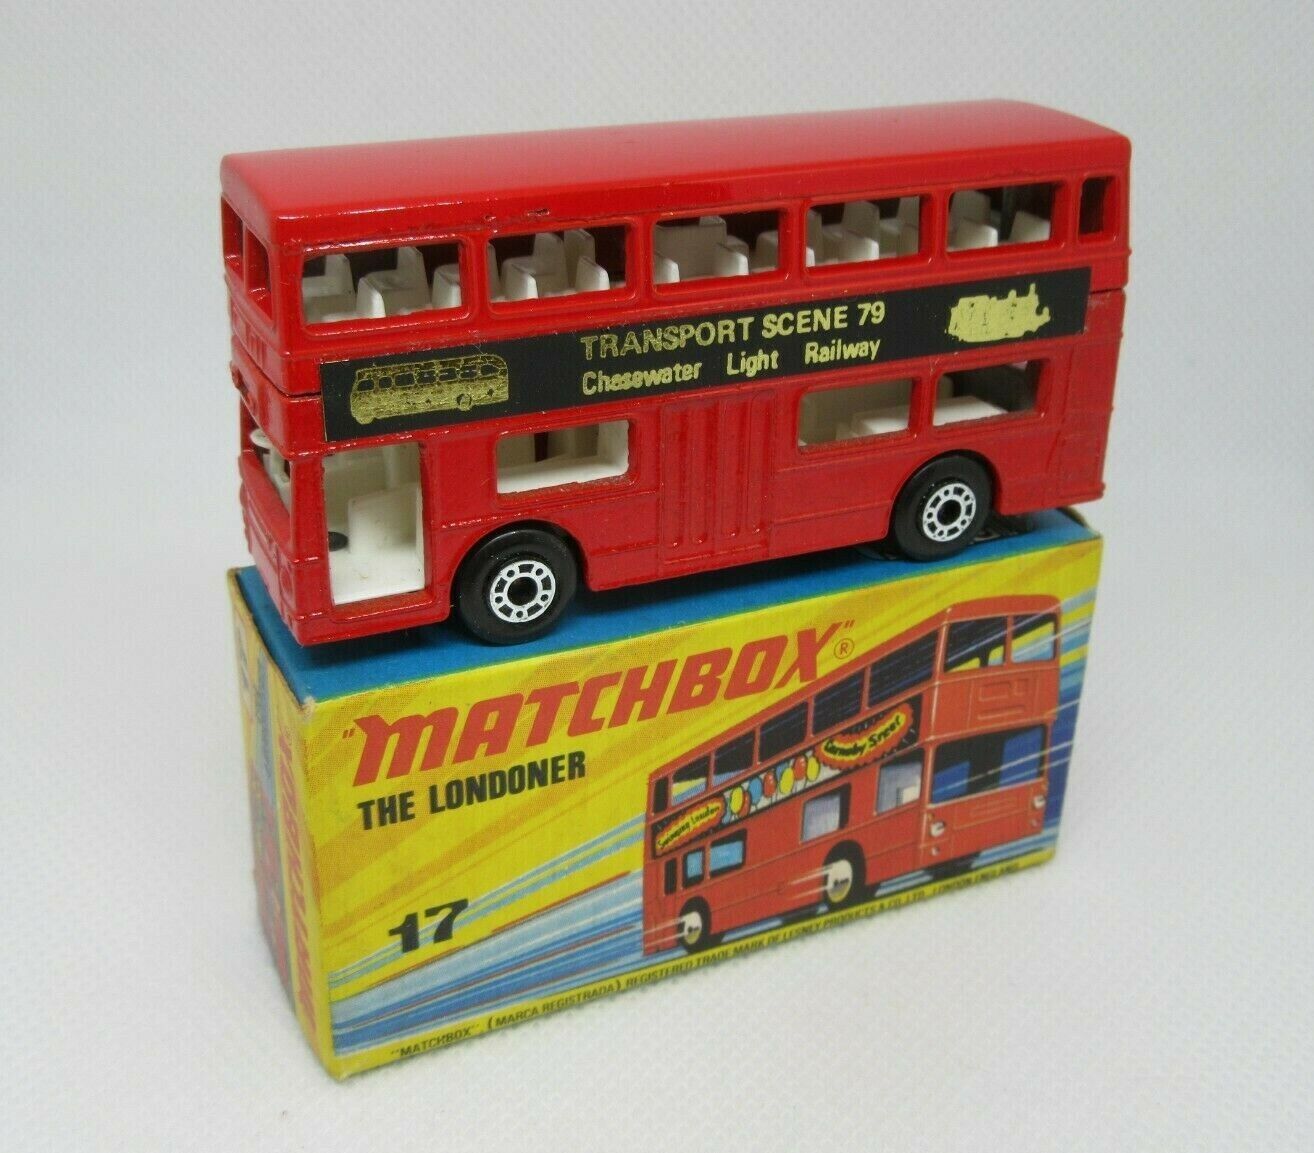 Matchbox Superfast 17b The Londoner - CHASEWATER LIGHT RAILWAY 79 - Mint/Boxed